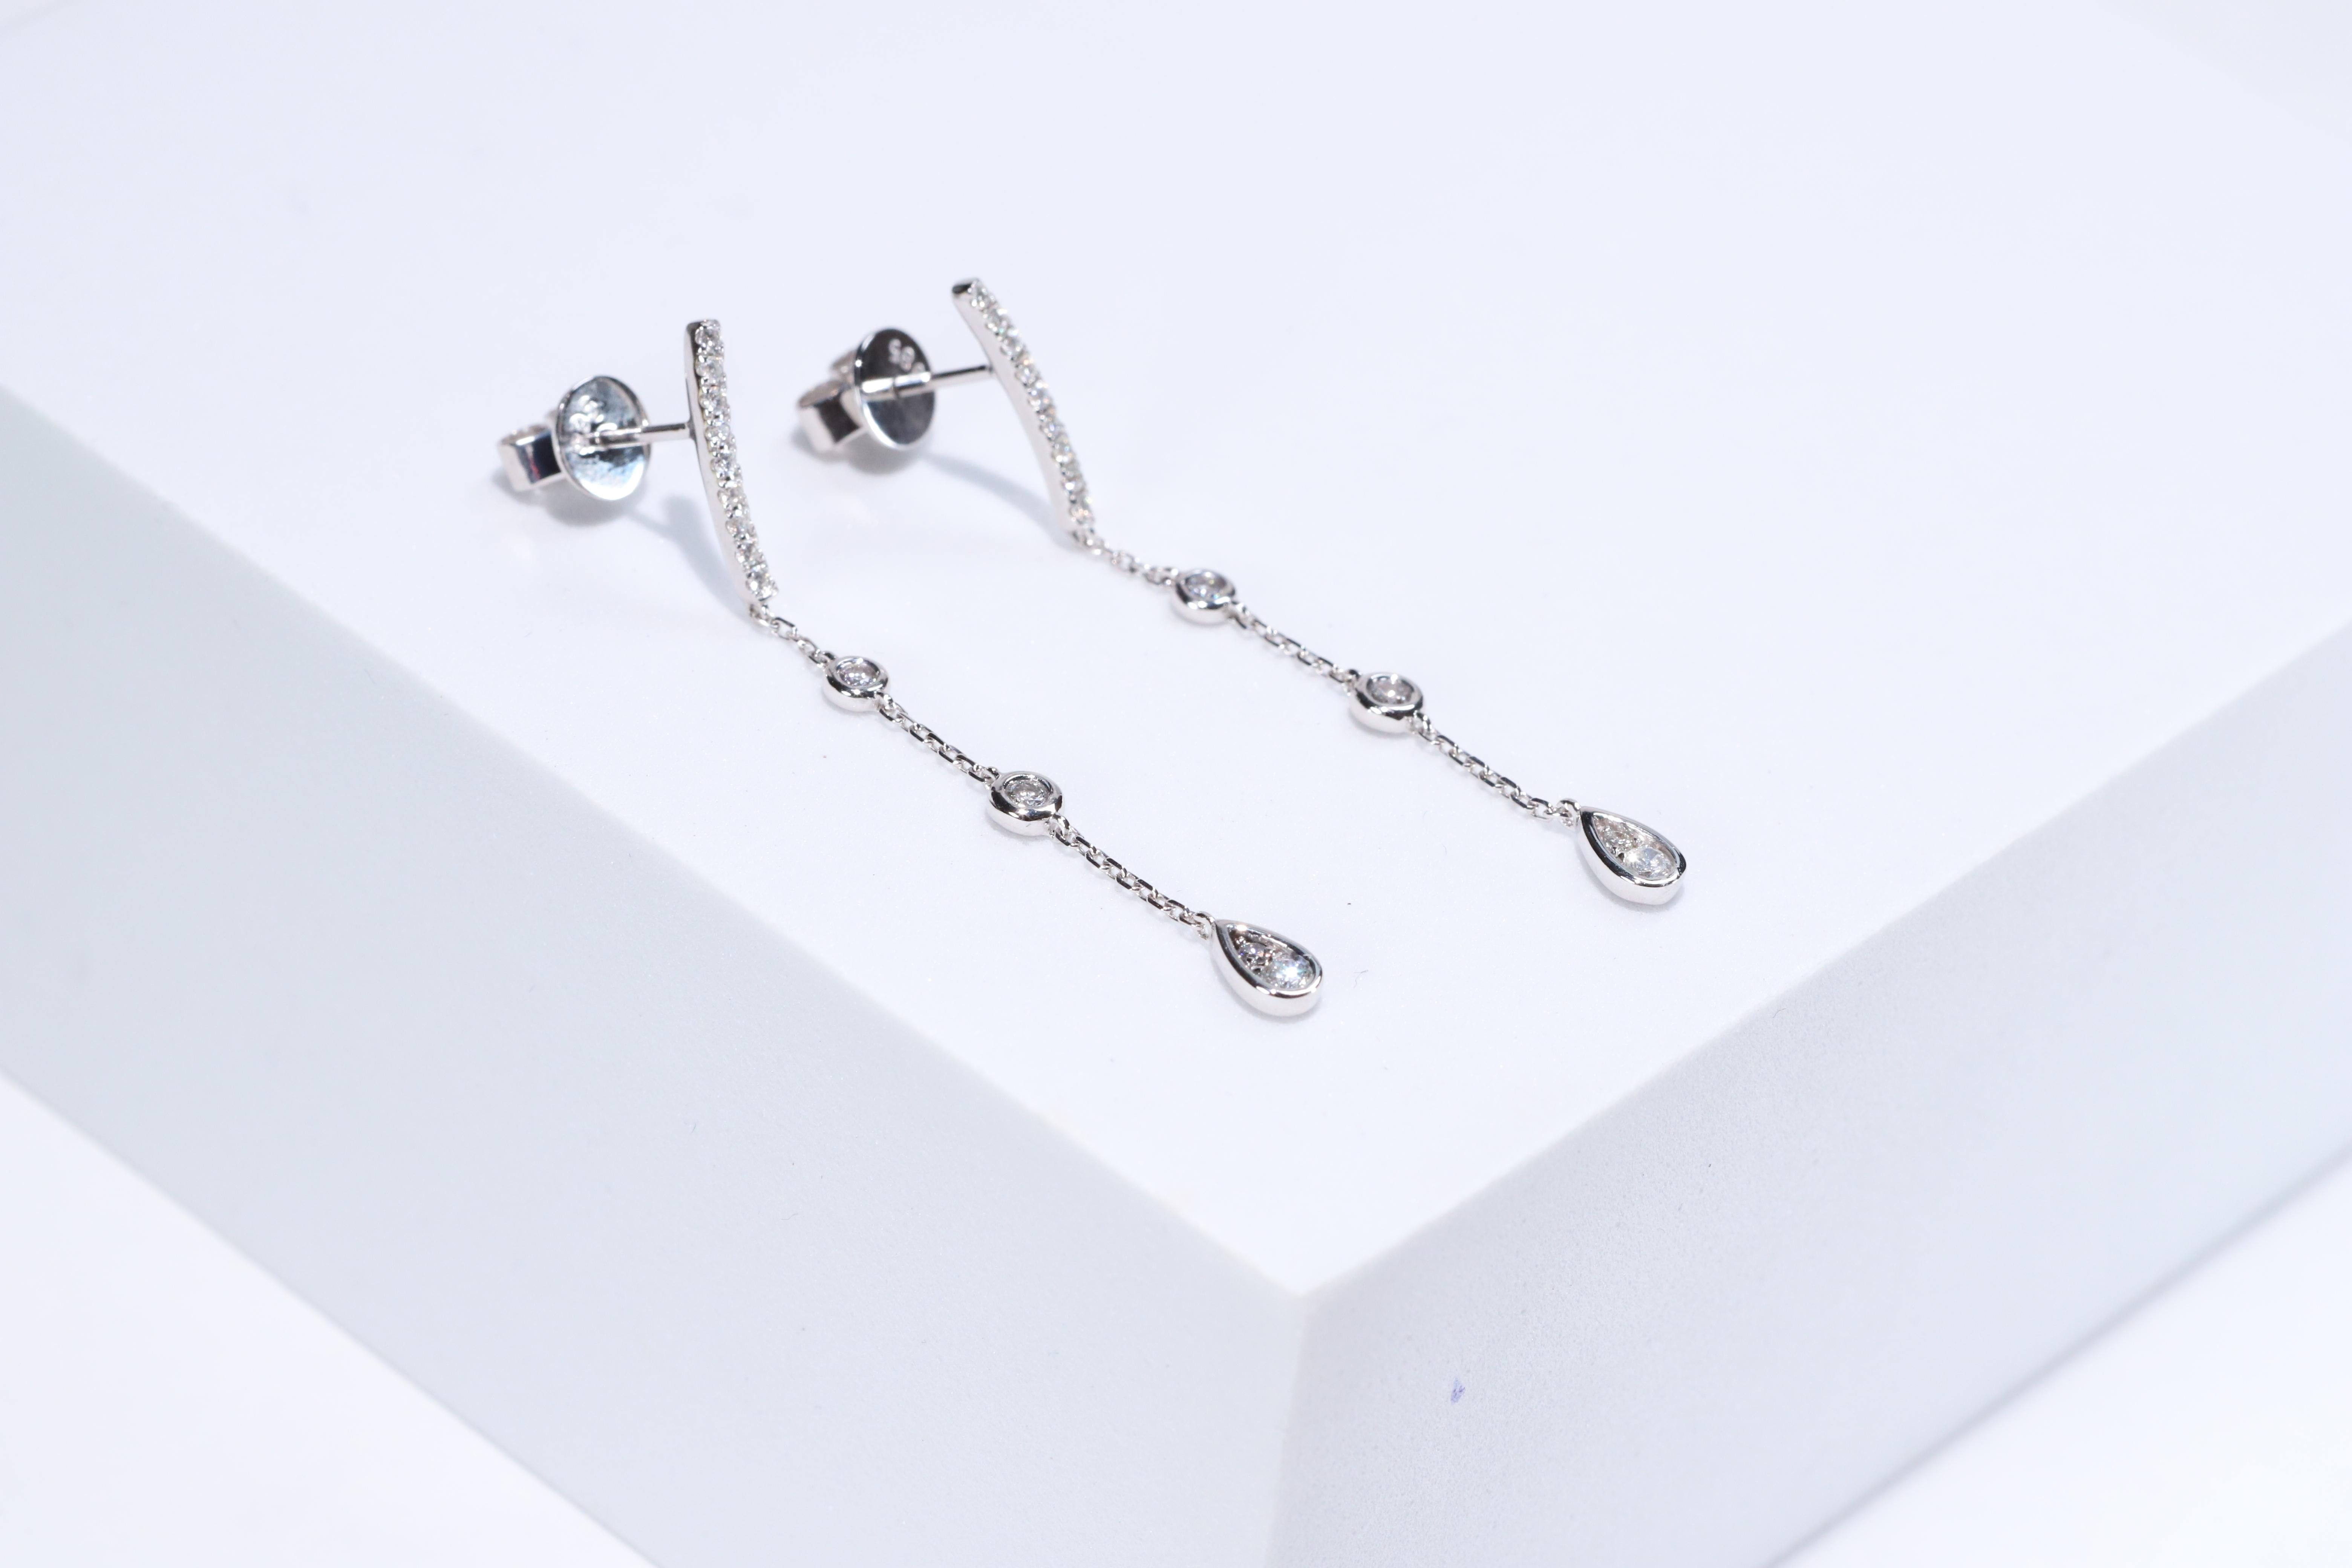 Each of these pretty earrings from Gin & Grace features a with white diamonds. These earrings are made of rich 14-karat White gold with a high polish. Style: Dangle, Diamonds: 26 pcs Diamond cut: Round Diamond weight: 0.30 carat Color: G-H Clarity: